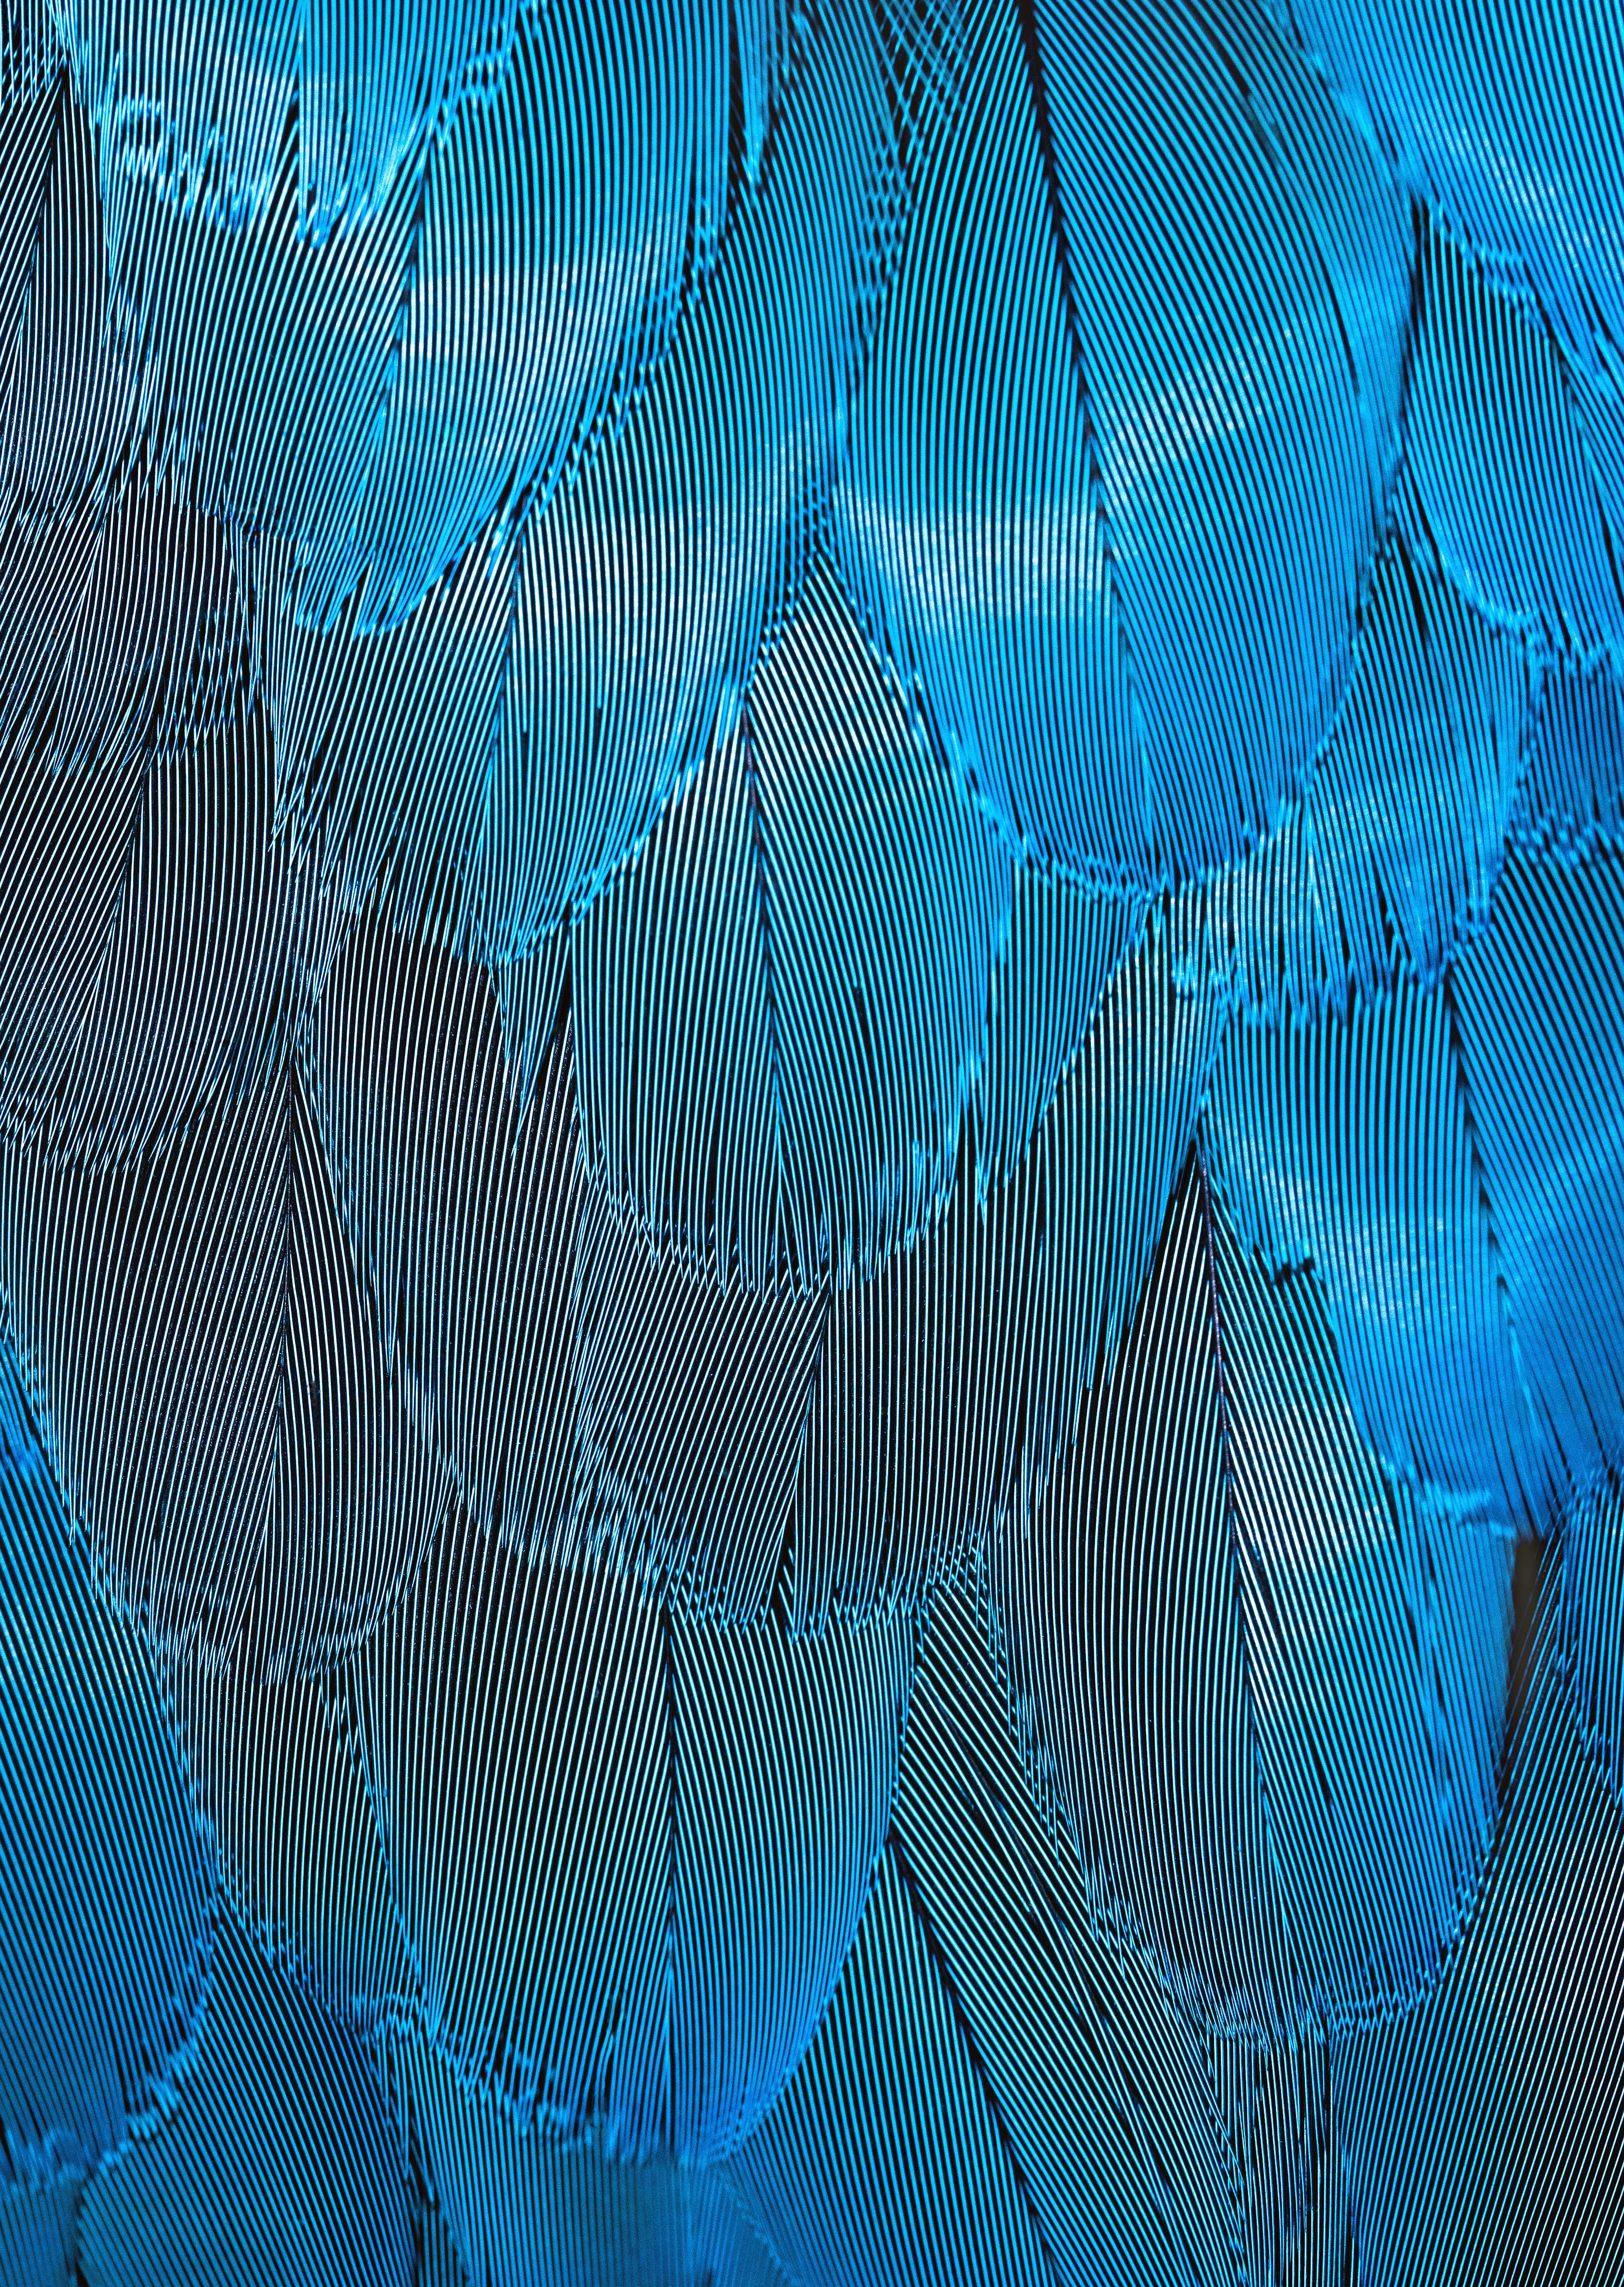 macro, feather, textures, blue, texture, iridescent for android